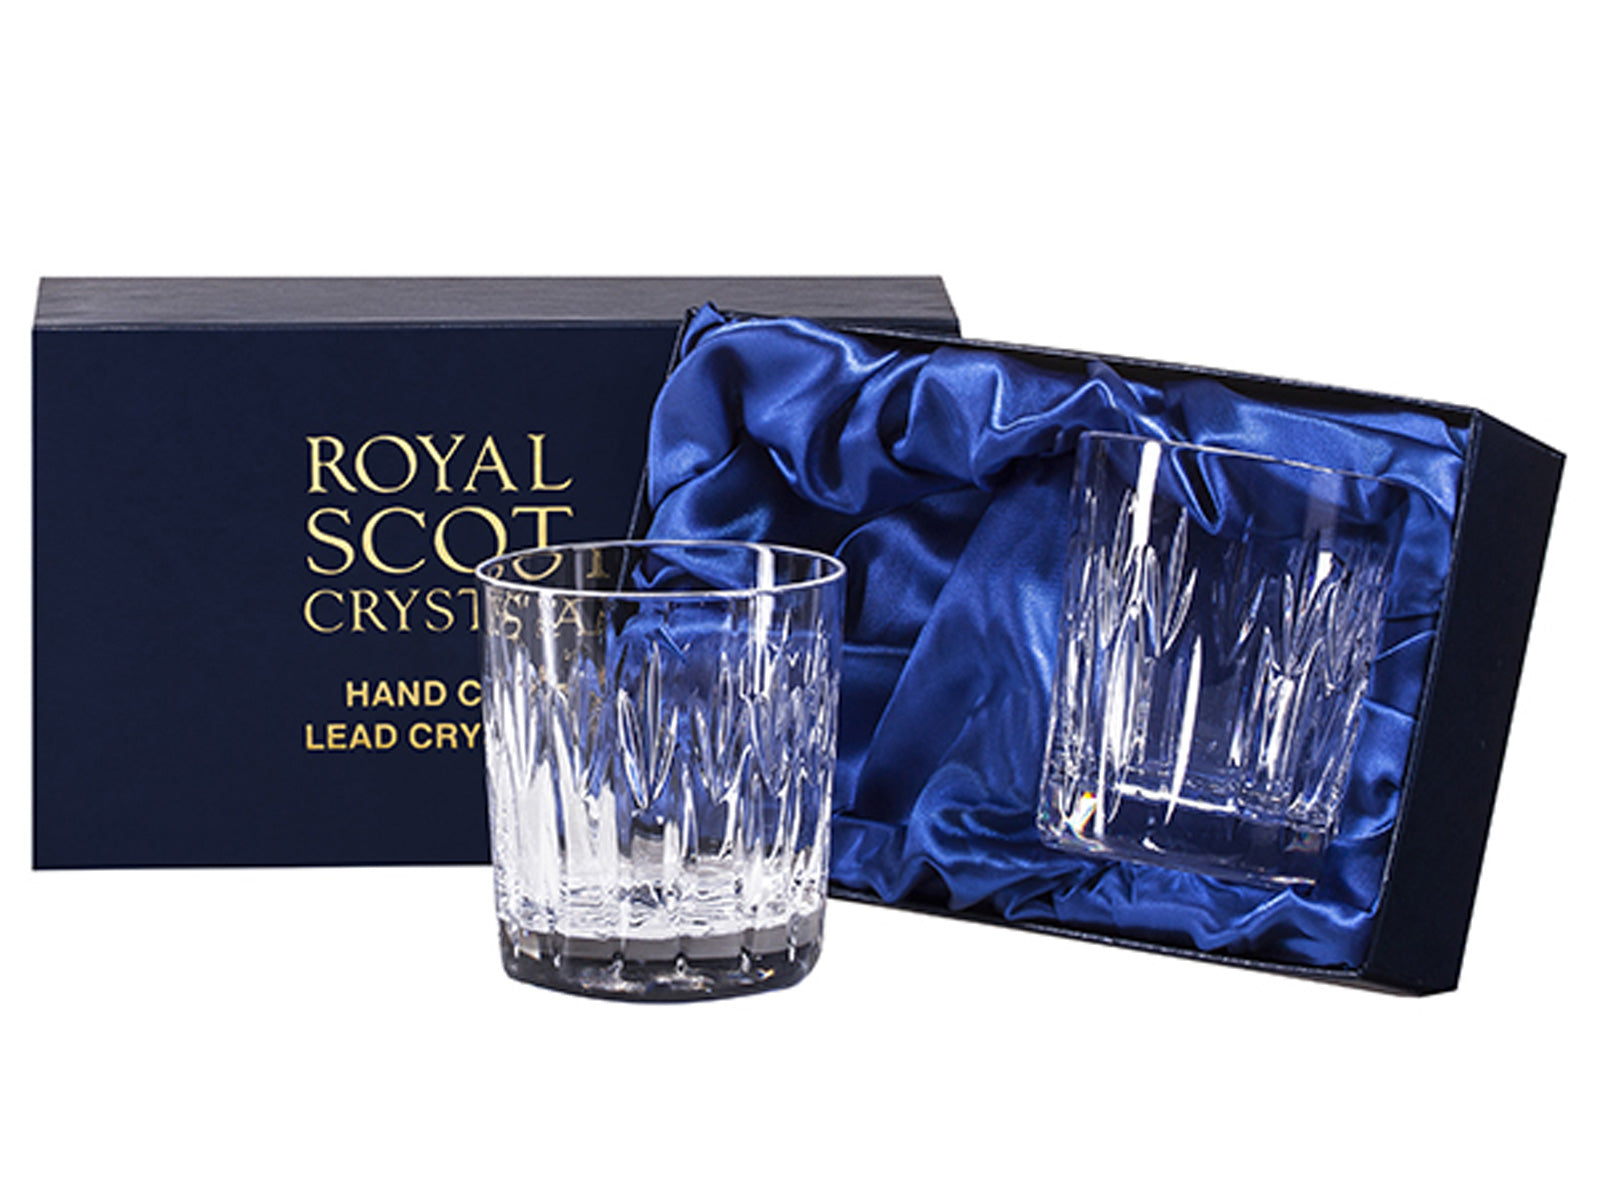 A pair of cut crystal tumblers in a blue presentation box